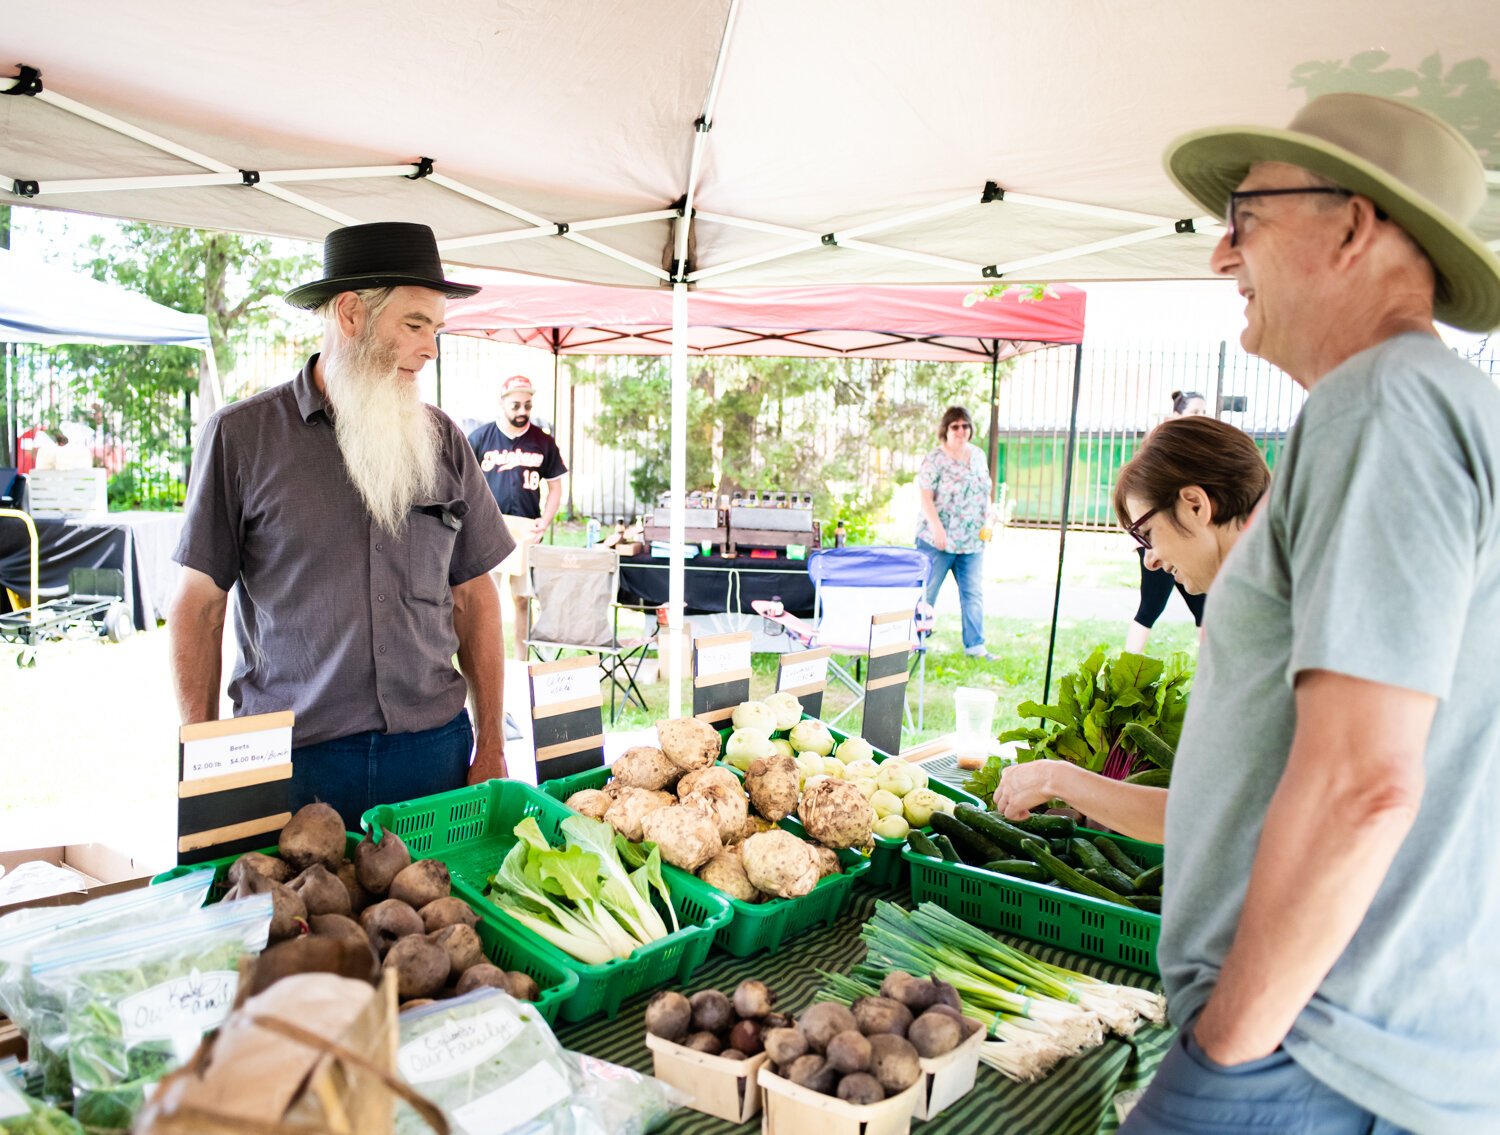 Myron Metzger with Berry Hill Farm helps customers during the Fort Wayne's Farmers Market at McCulloch Park on Saturday June 19, 2021.